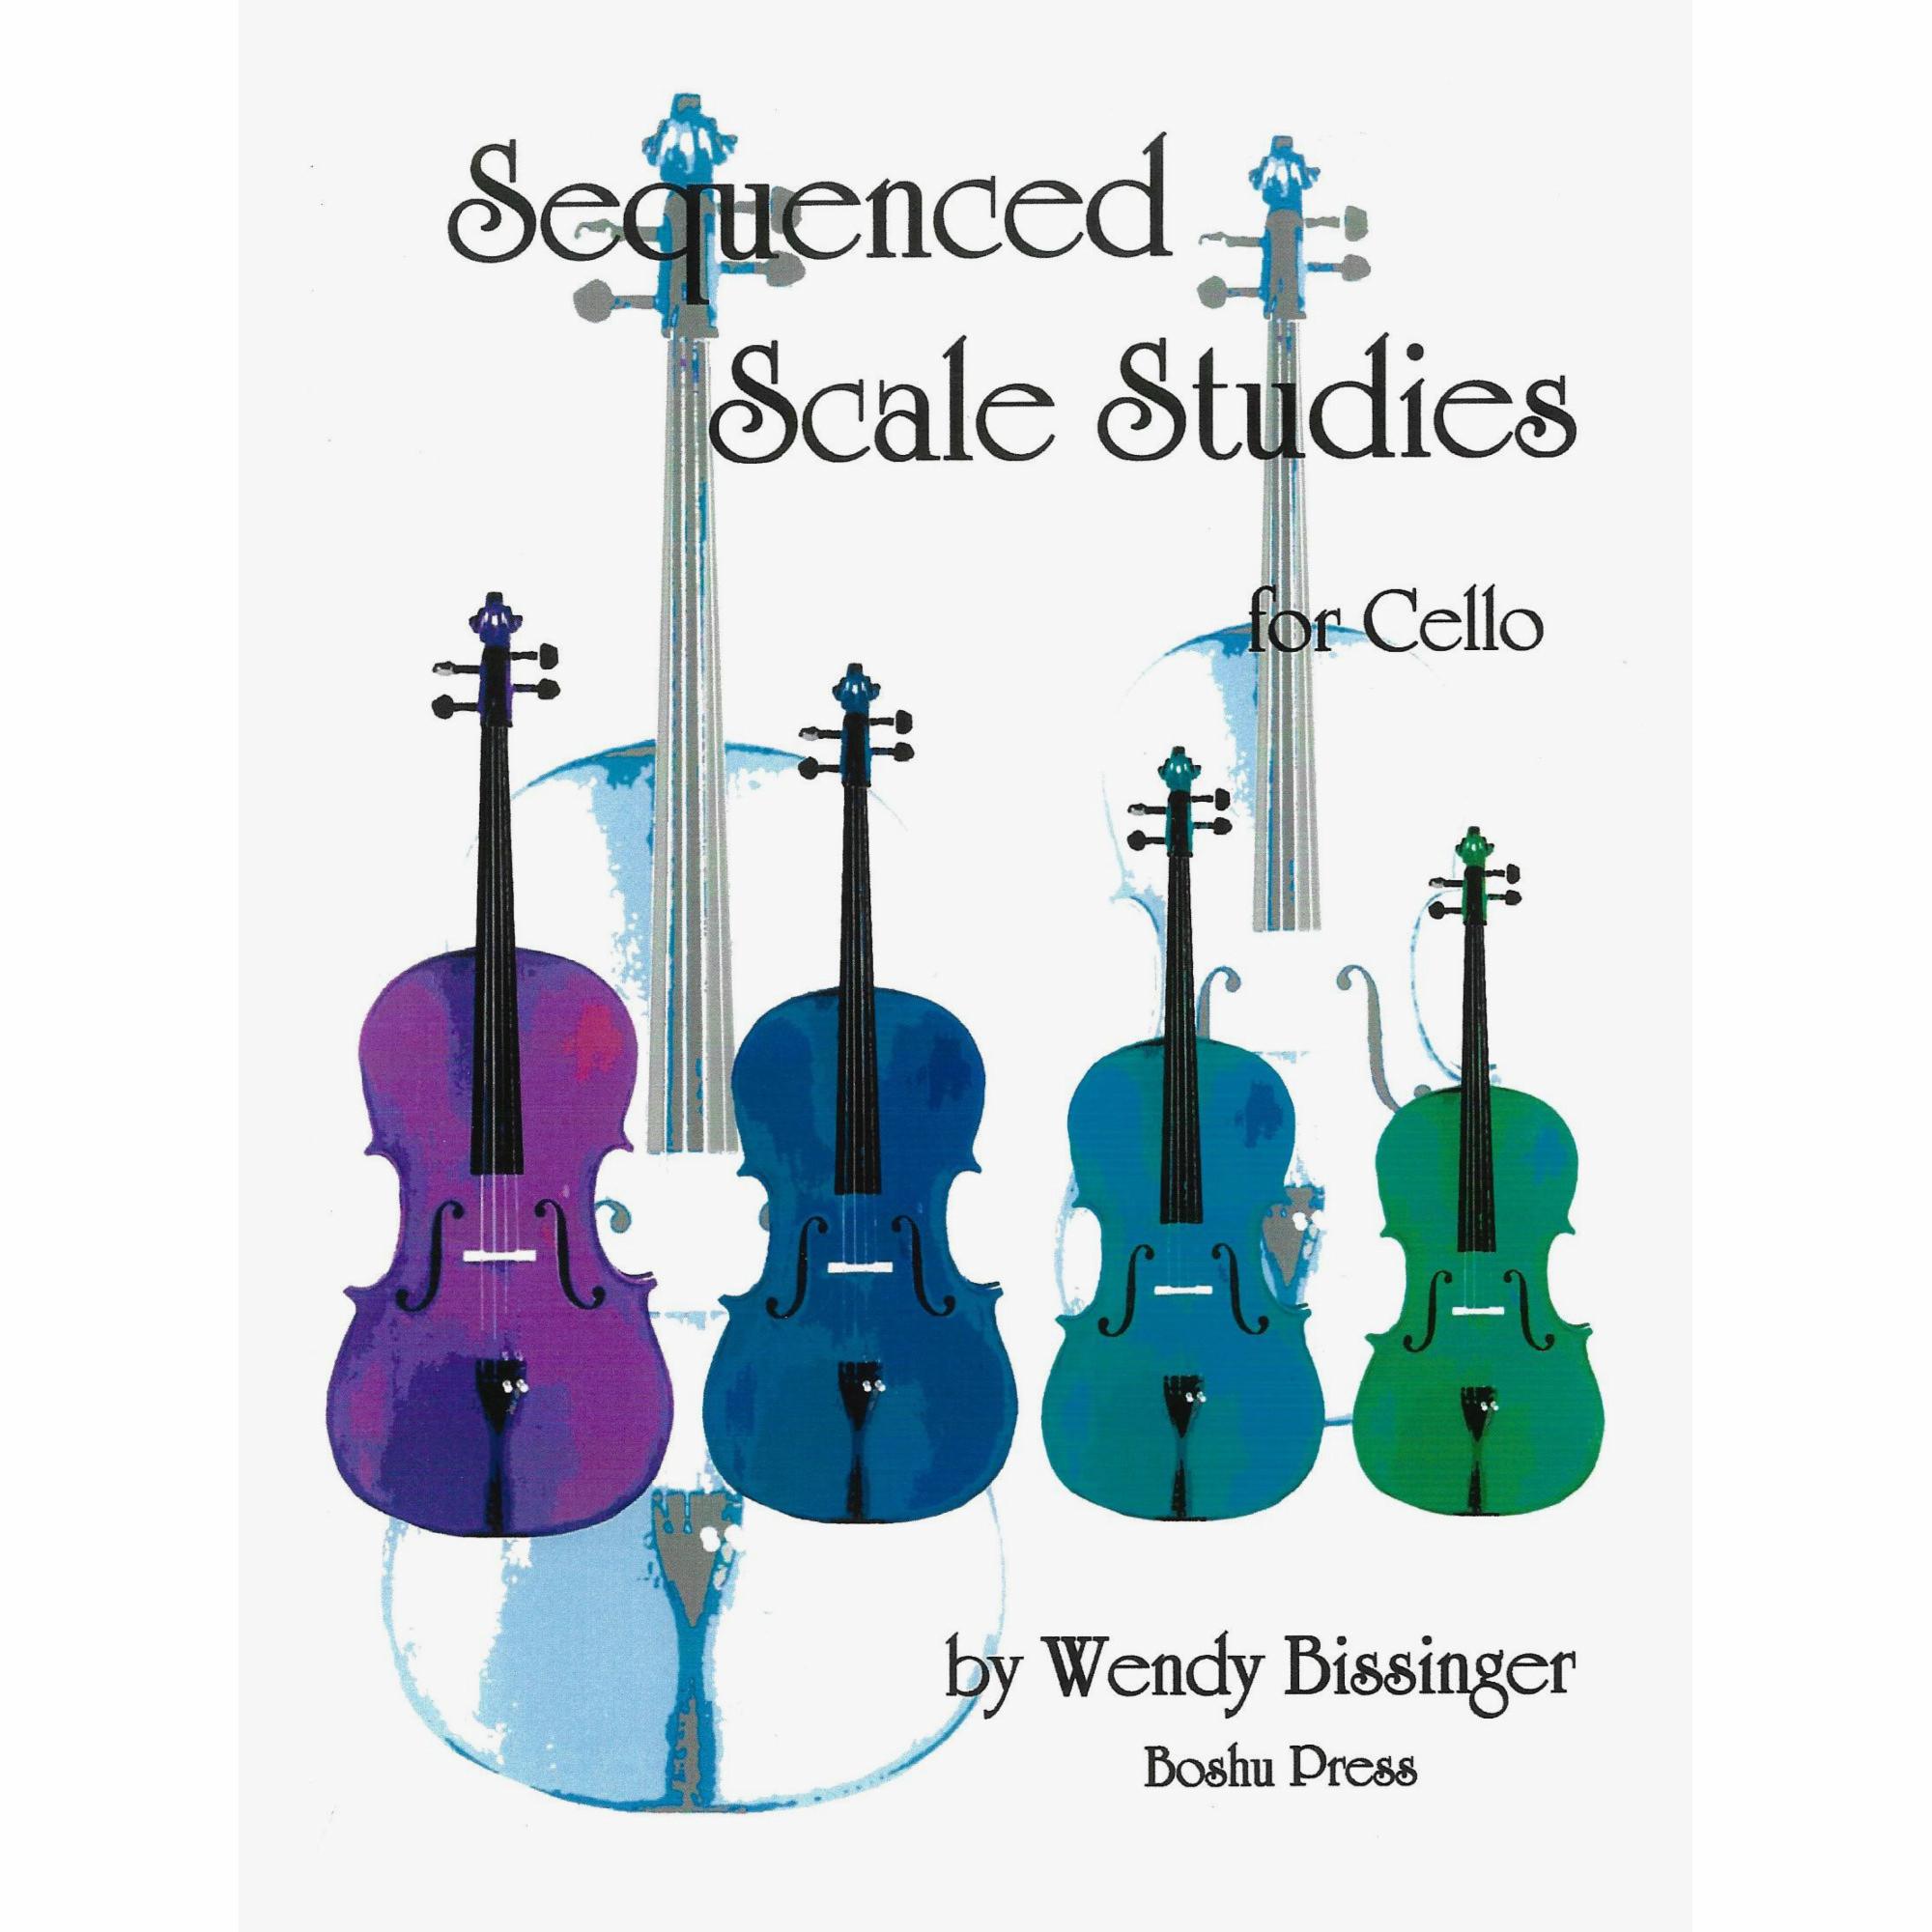 Sequenced Scale Studies for Cello